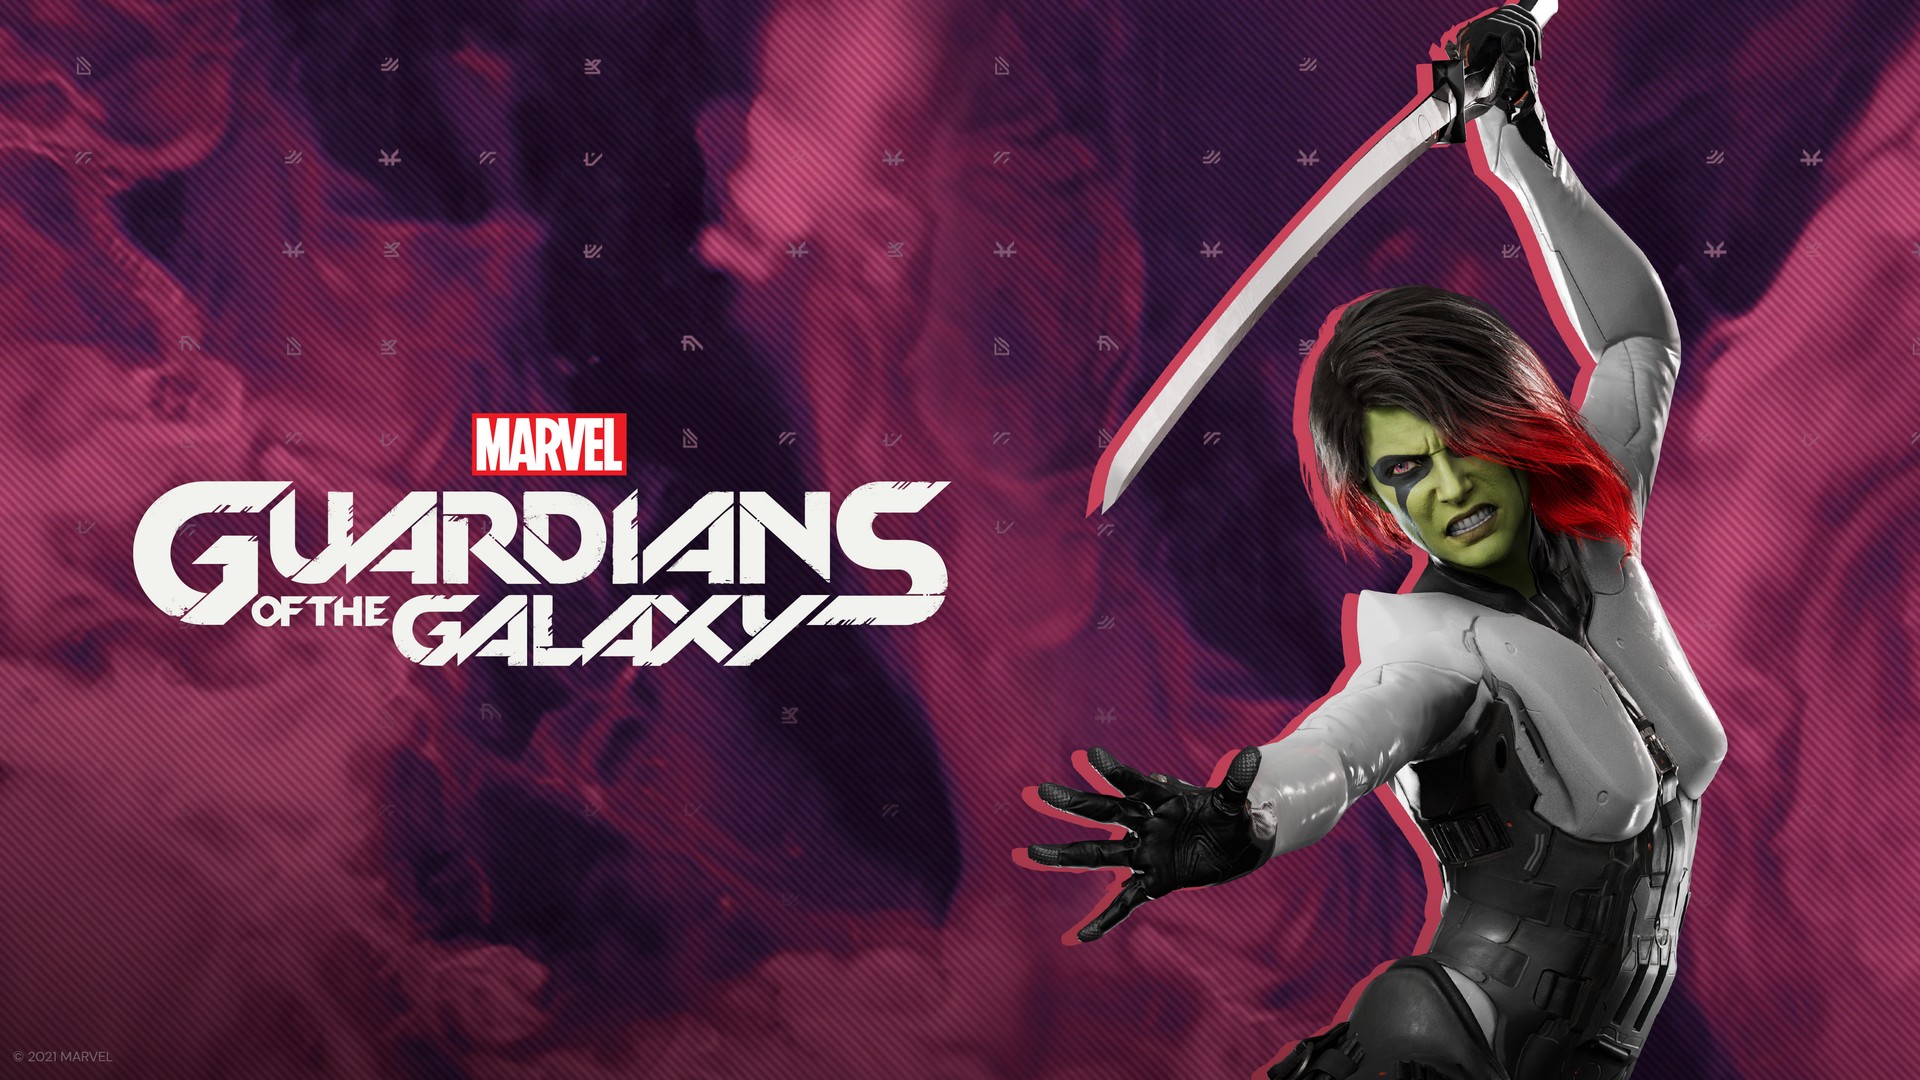 Designing The Guardians Of The Galaxy – A Fresh Take On Iconic Marvel Characters